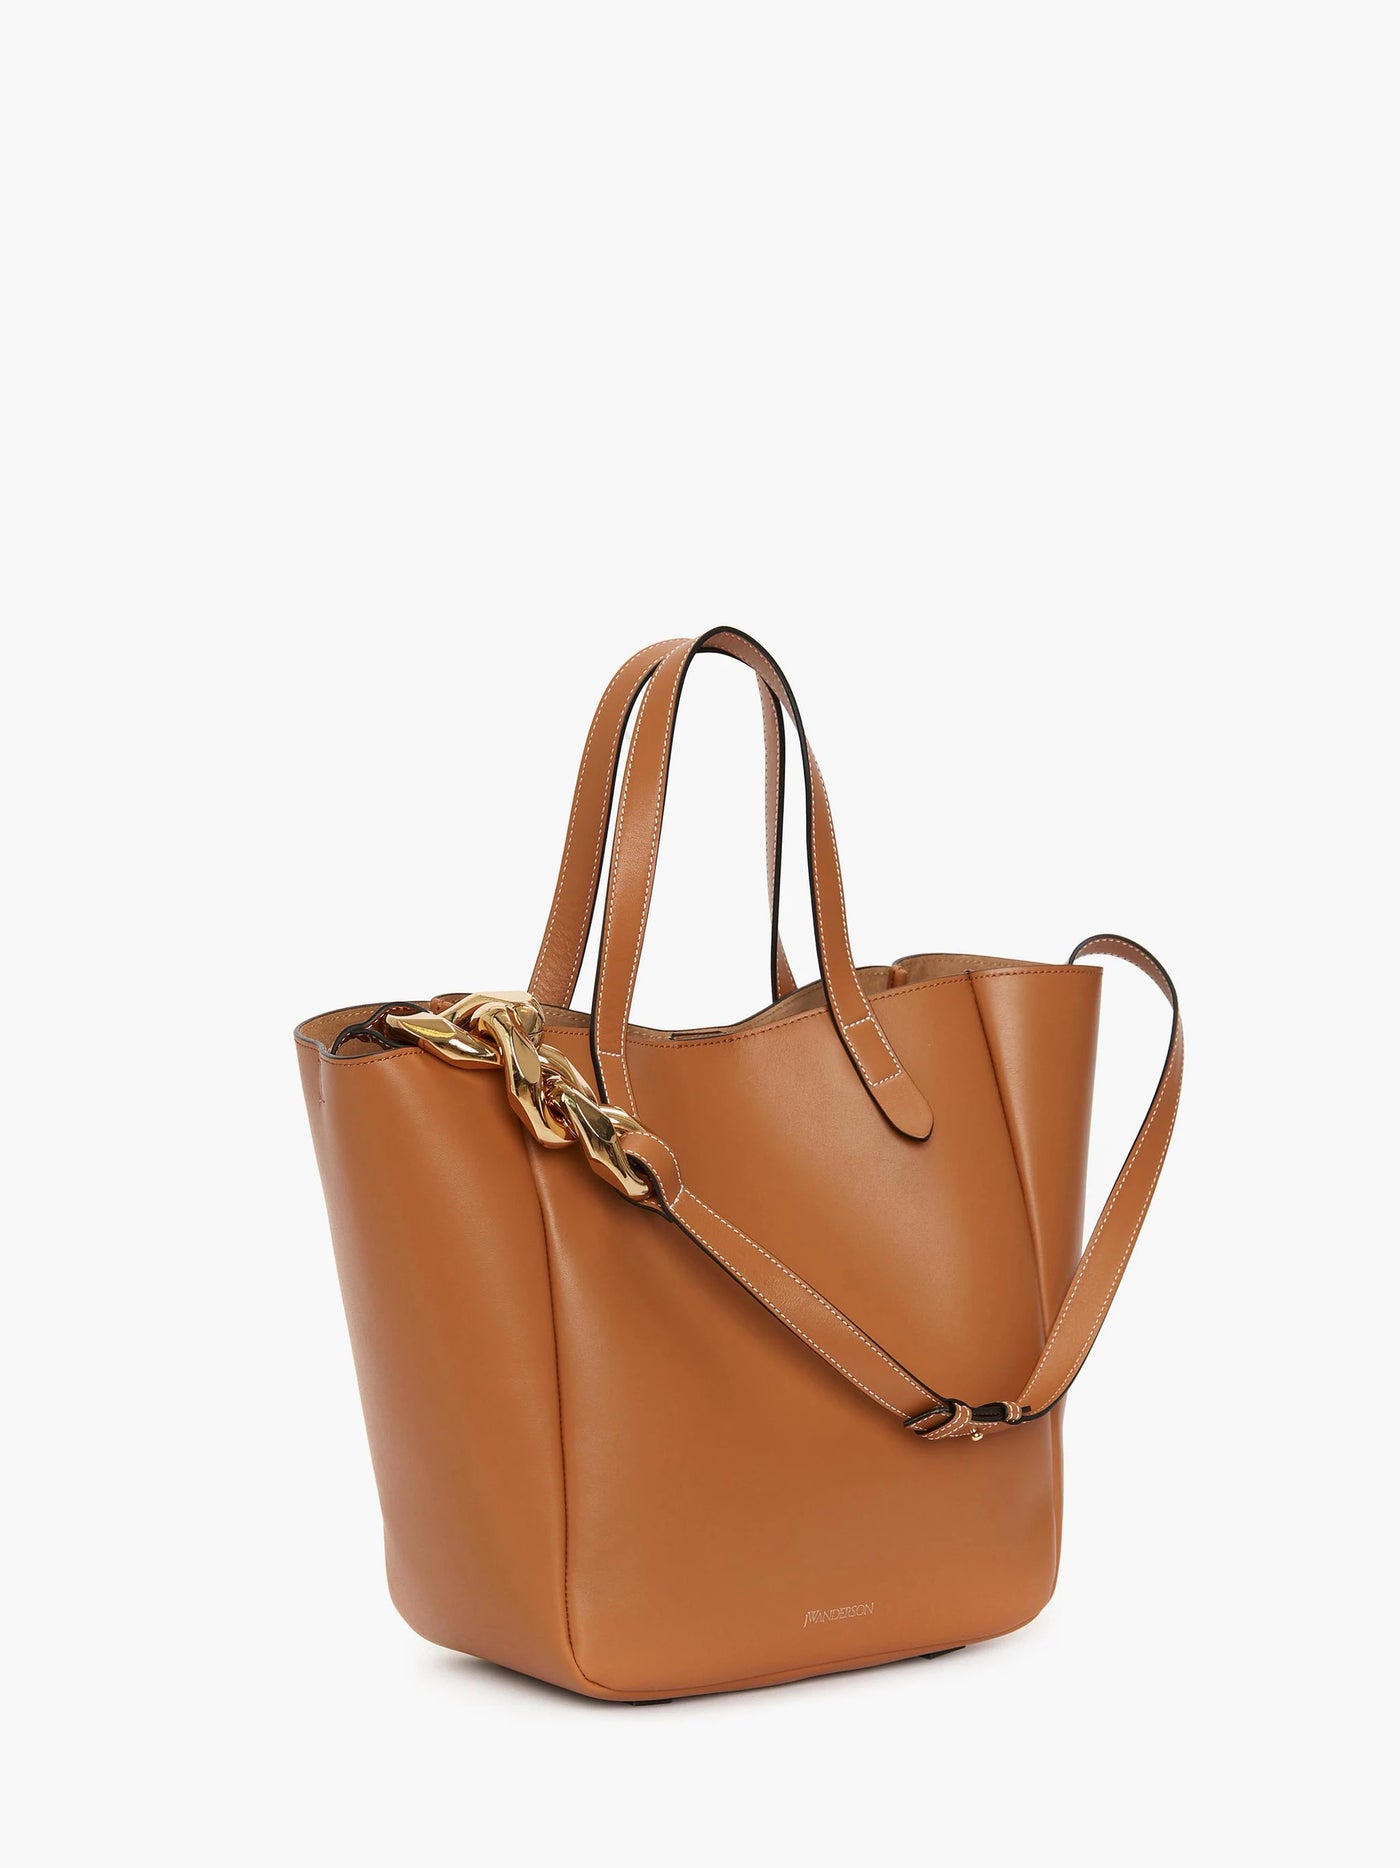 SMALL CHAIN LEATHER CABAS BAG - Pecan